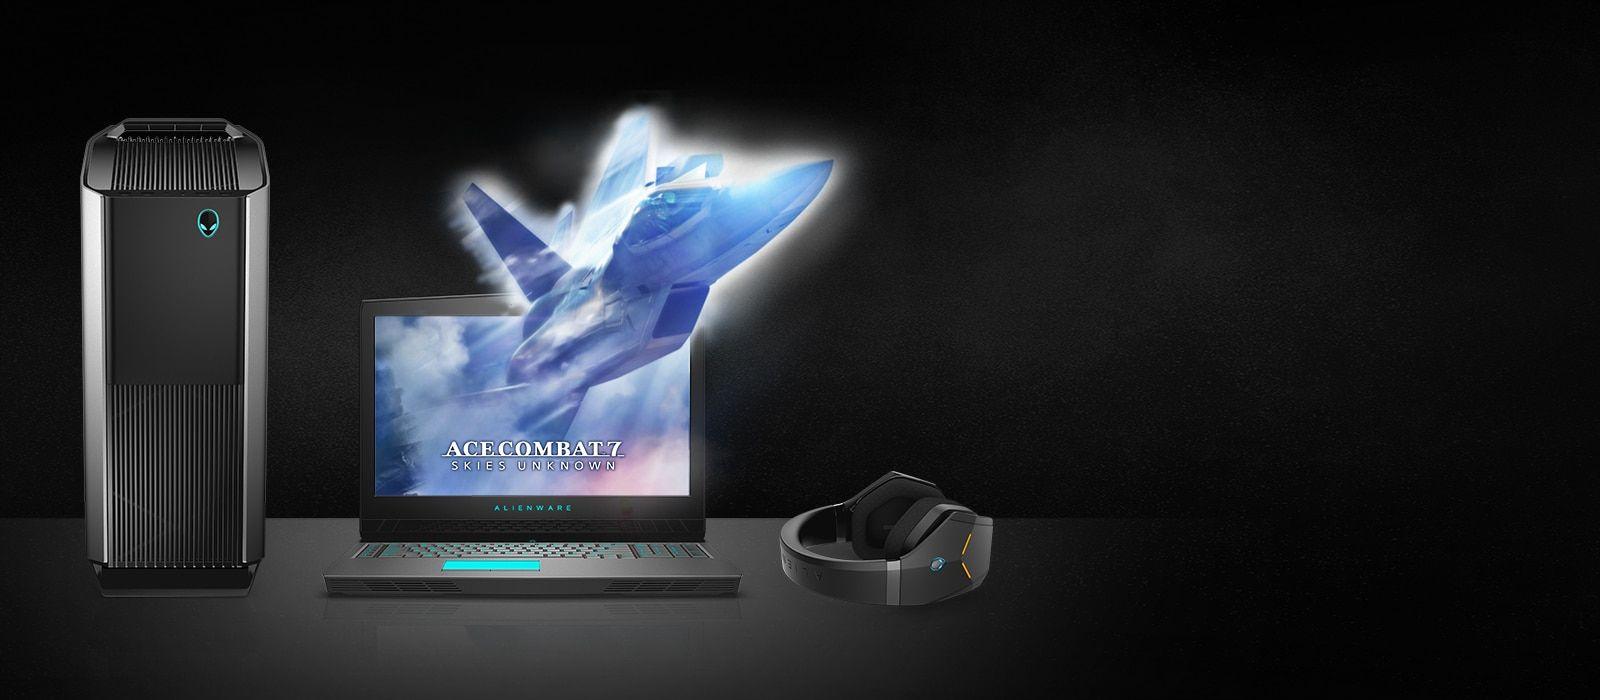 First Dell Logo - Alienware Gaming PCs: Laptops, Desktops and Consoles | Dell United ...